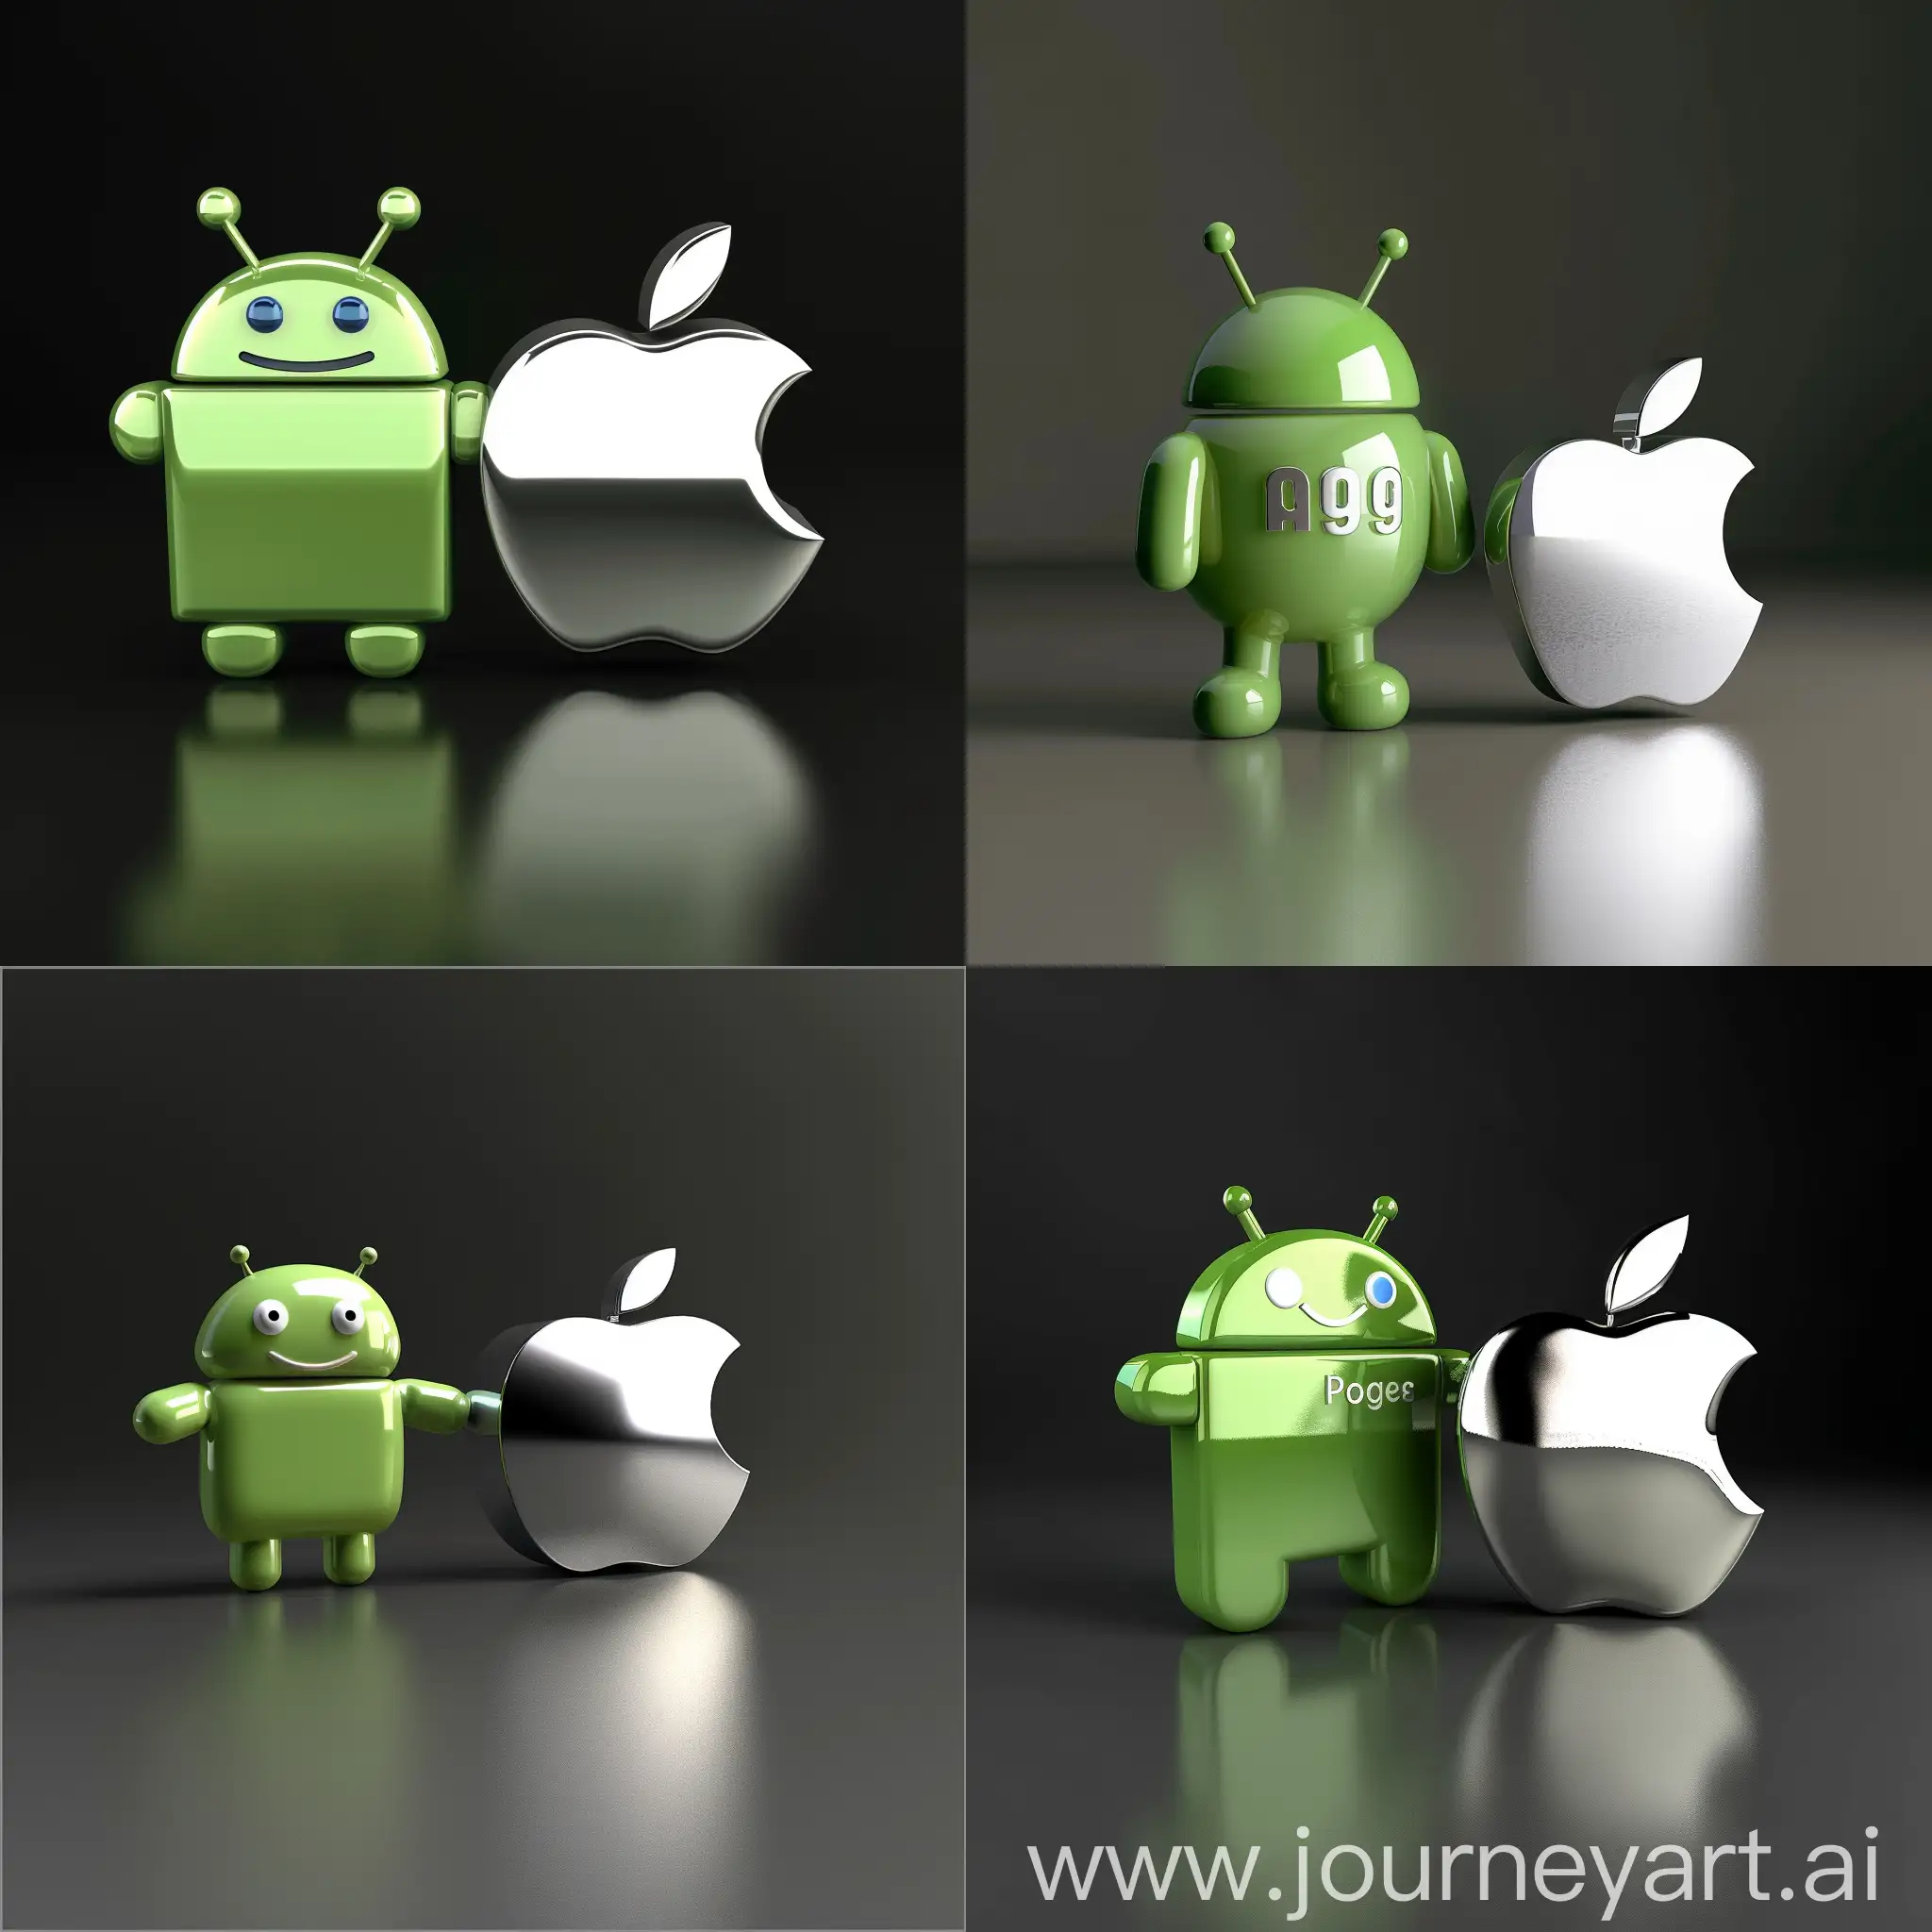 Positive-Collaboration-Android-and-Apple-Icons-Symbolizing-Unity